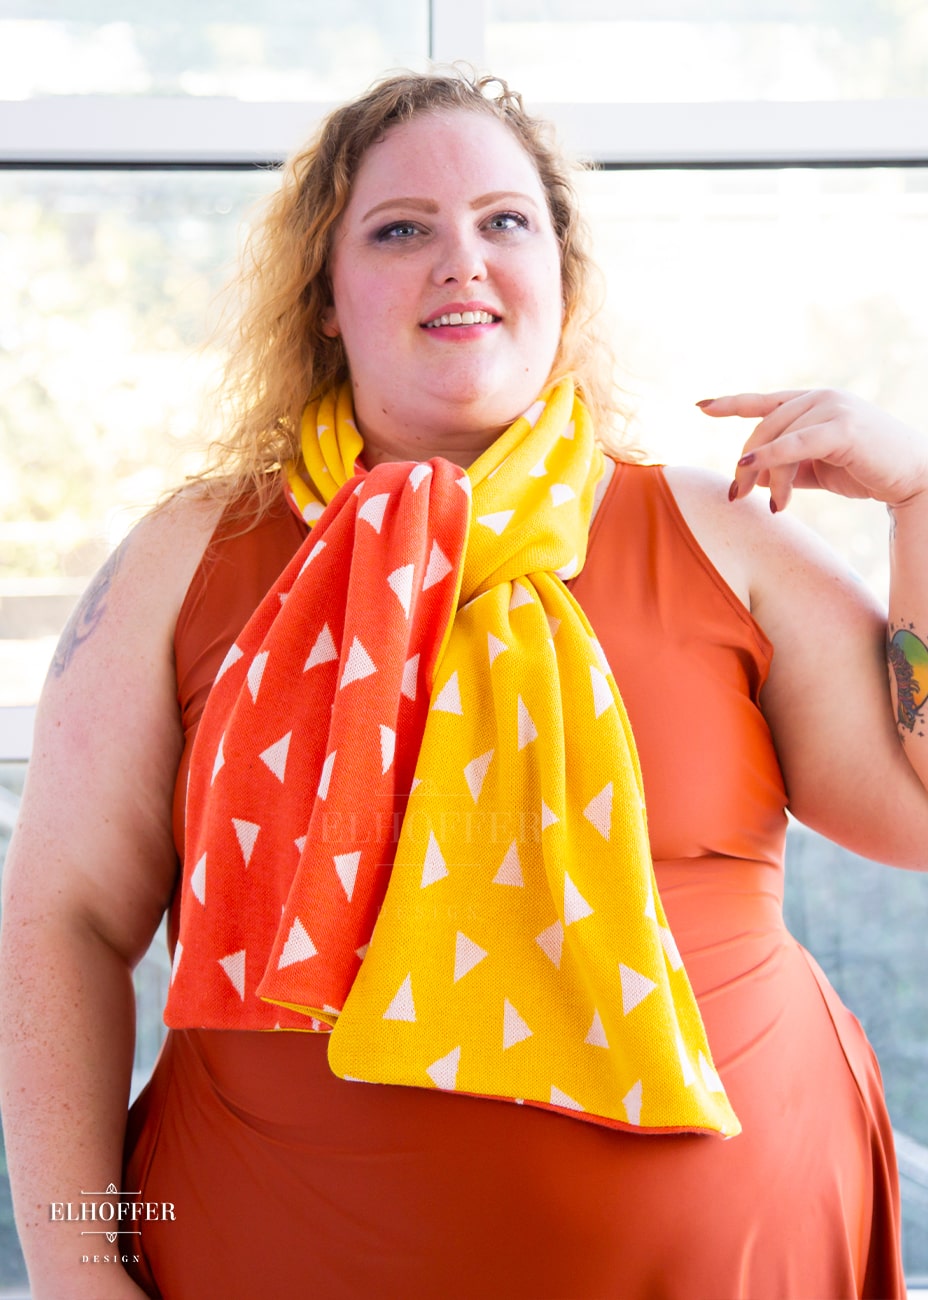 Bee, a fair skinned 3xl model with medium length curly blonde hair, is smiling while wearing a reversible knit scarf.  One side of the scarf is orange with white triangles and the other side is yellow with white triangles.